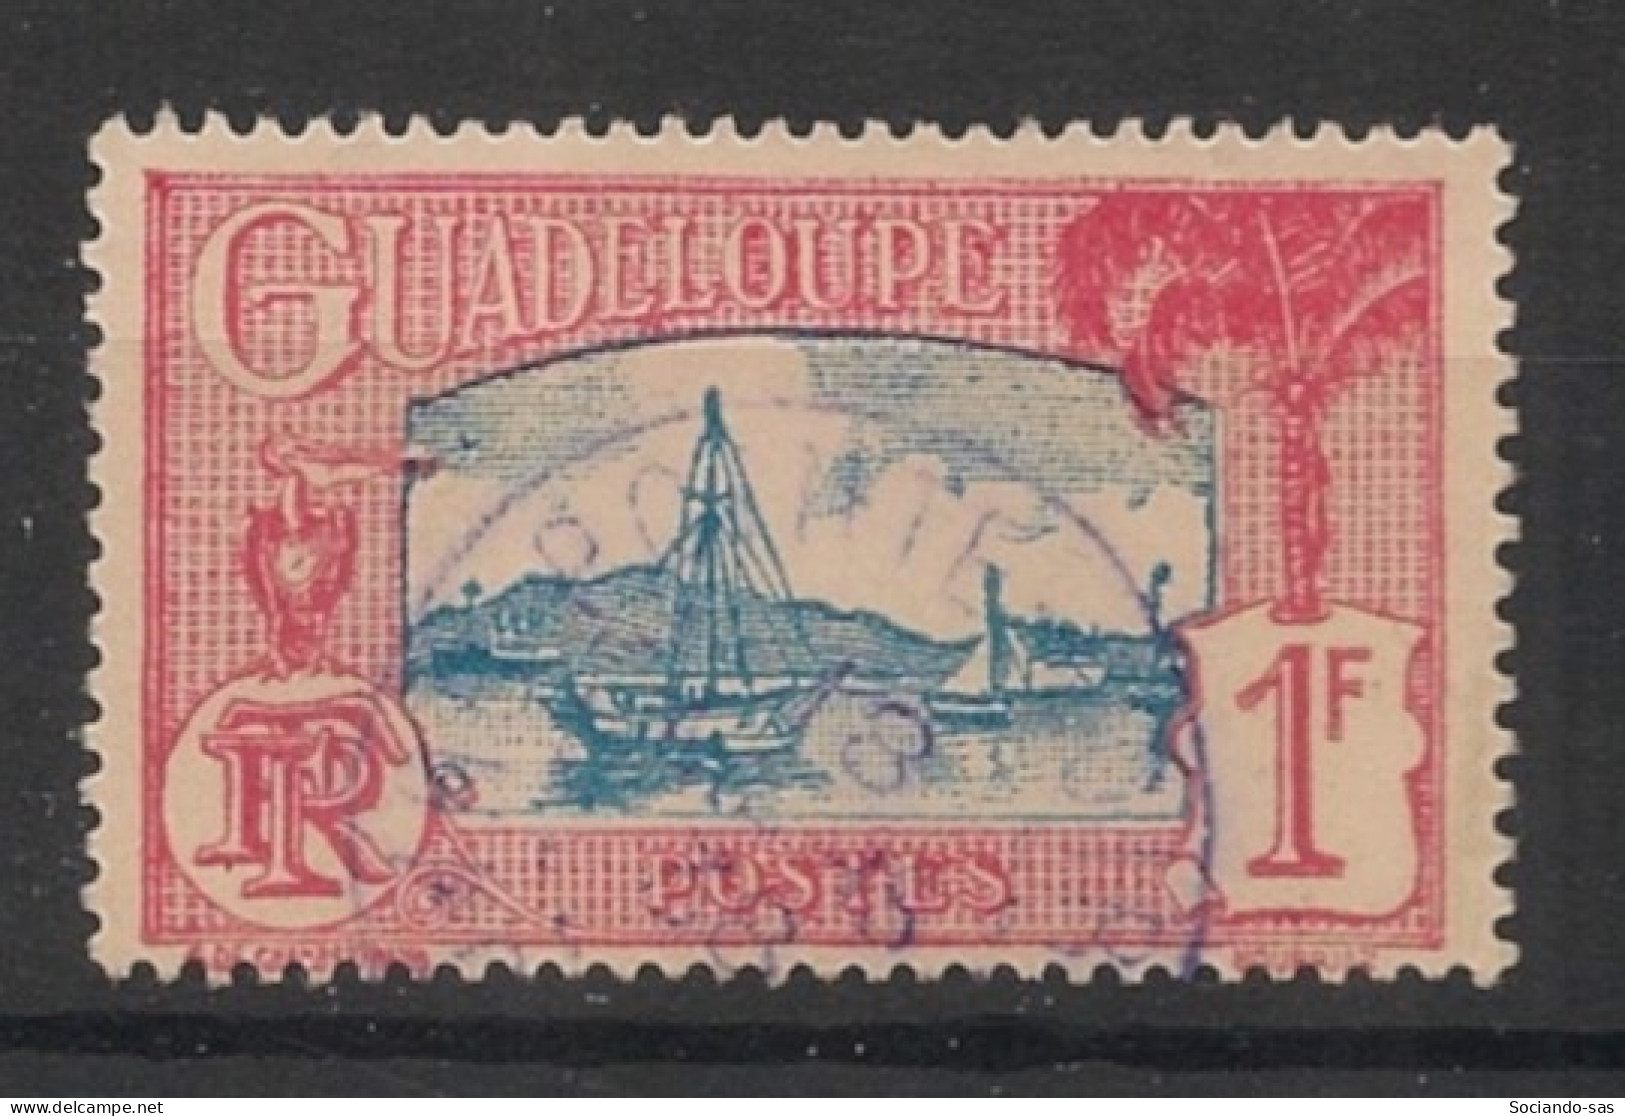 GUADELOUPE - 1928-38 - N°YT. 114 - Pointe-à-Pitre 1f - Oblitéré / Used - Used Stamps